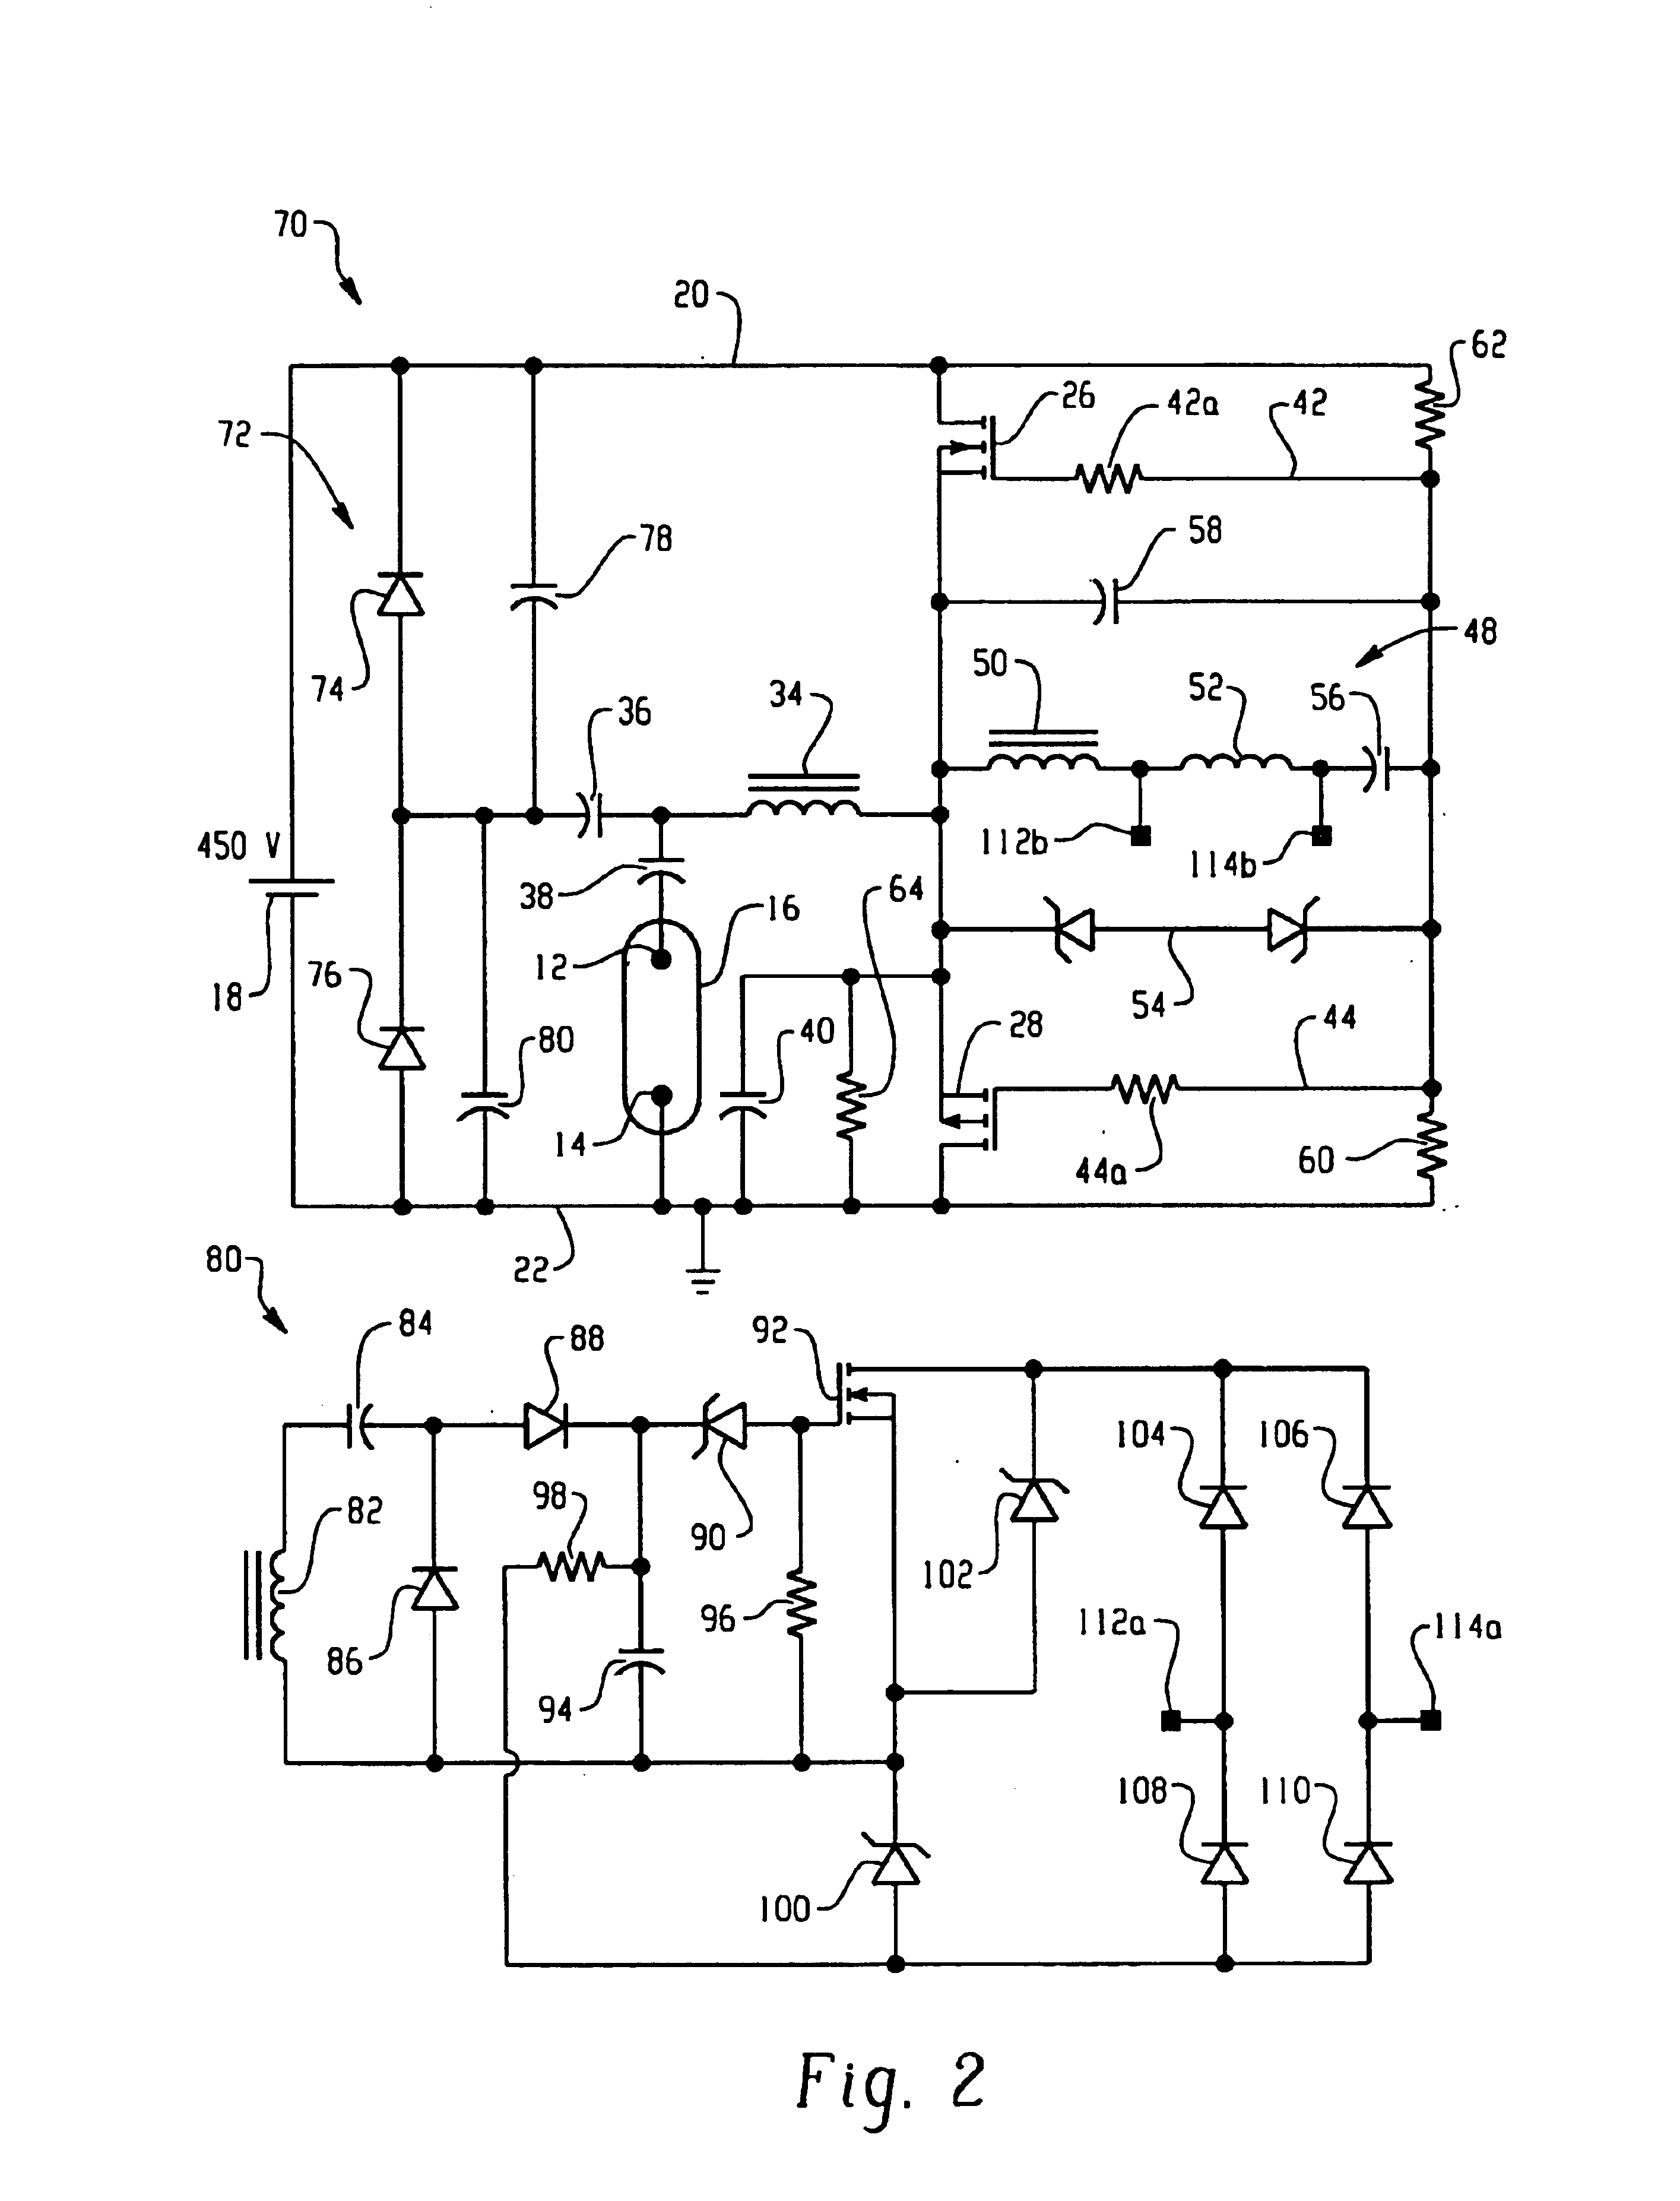 Continuous mode voltage fed inverter